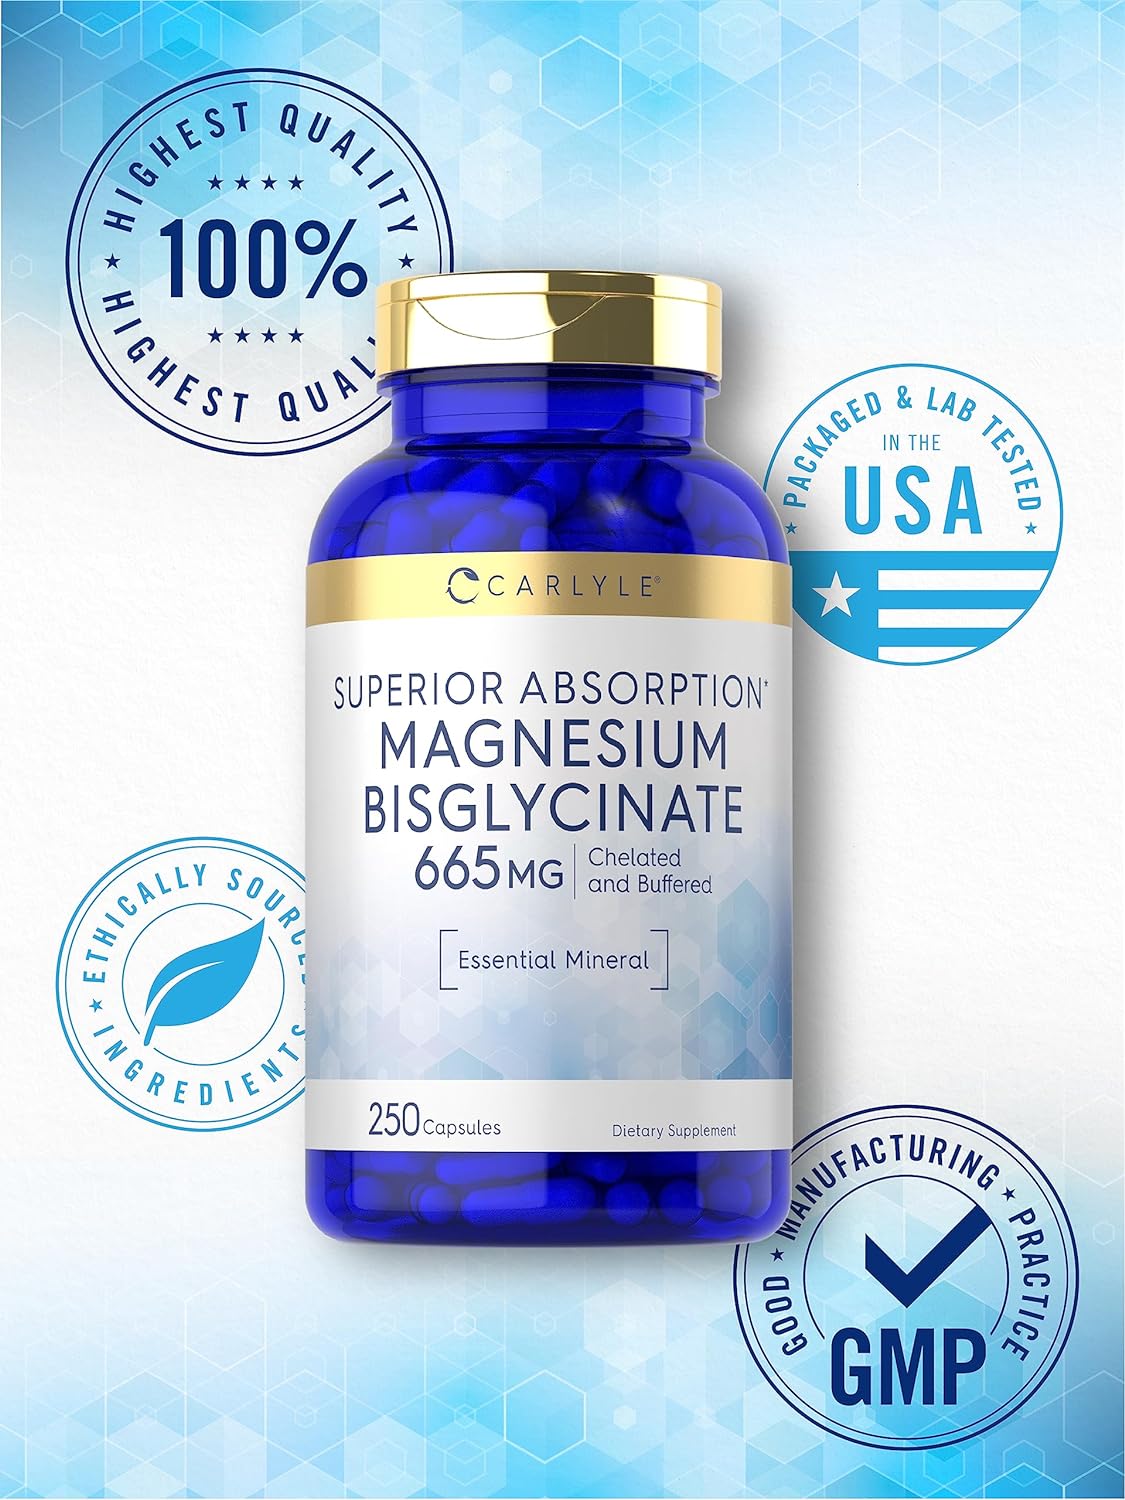 Carlyle Buffered Magnesium Bisglycinate 665 mg | 250 Capsules | Chelated Essential Mineral | Non-GMO and Gluten Free Supplement : Health & Household